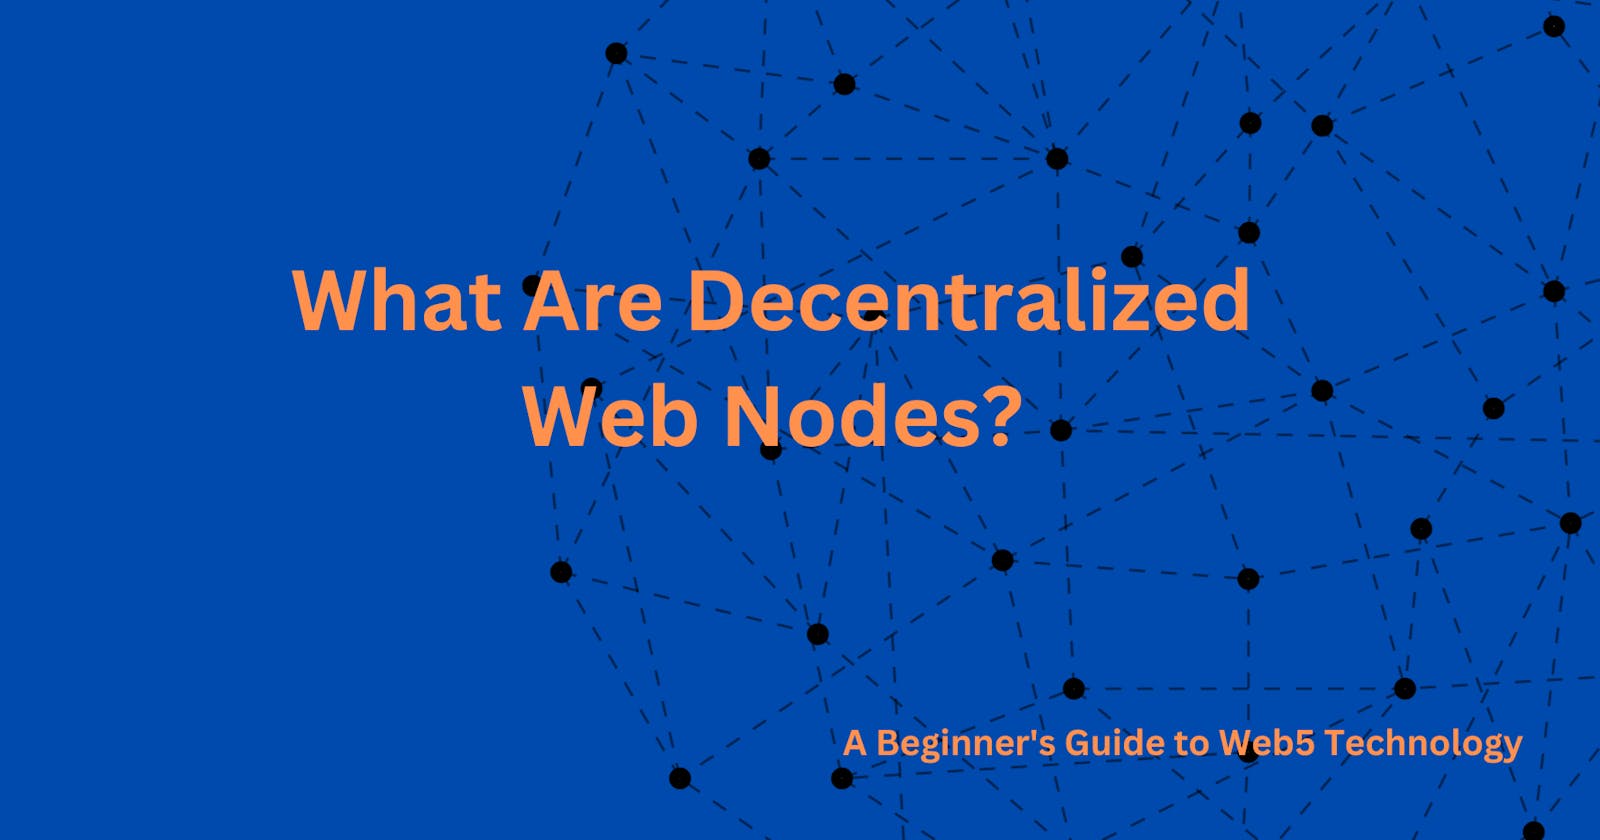 What Are Decentralized Web Nodes (DWNs) and How Do They Work?